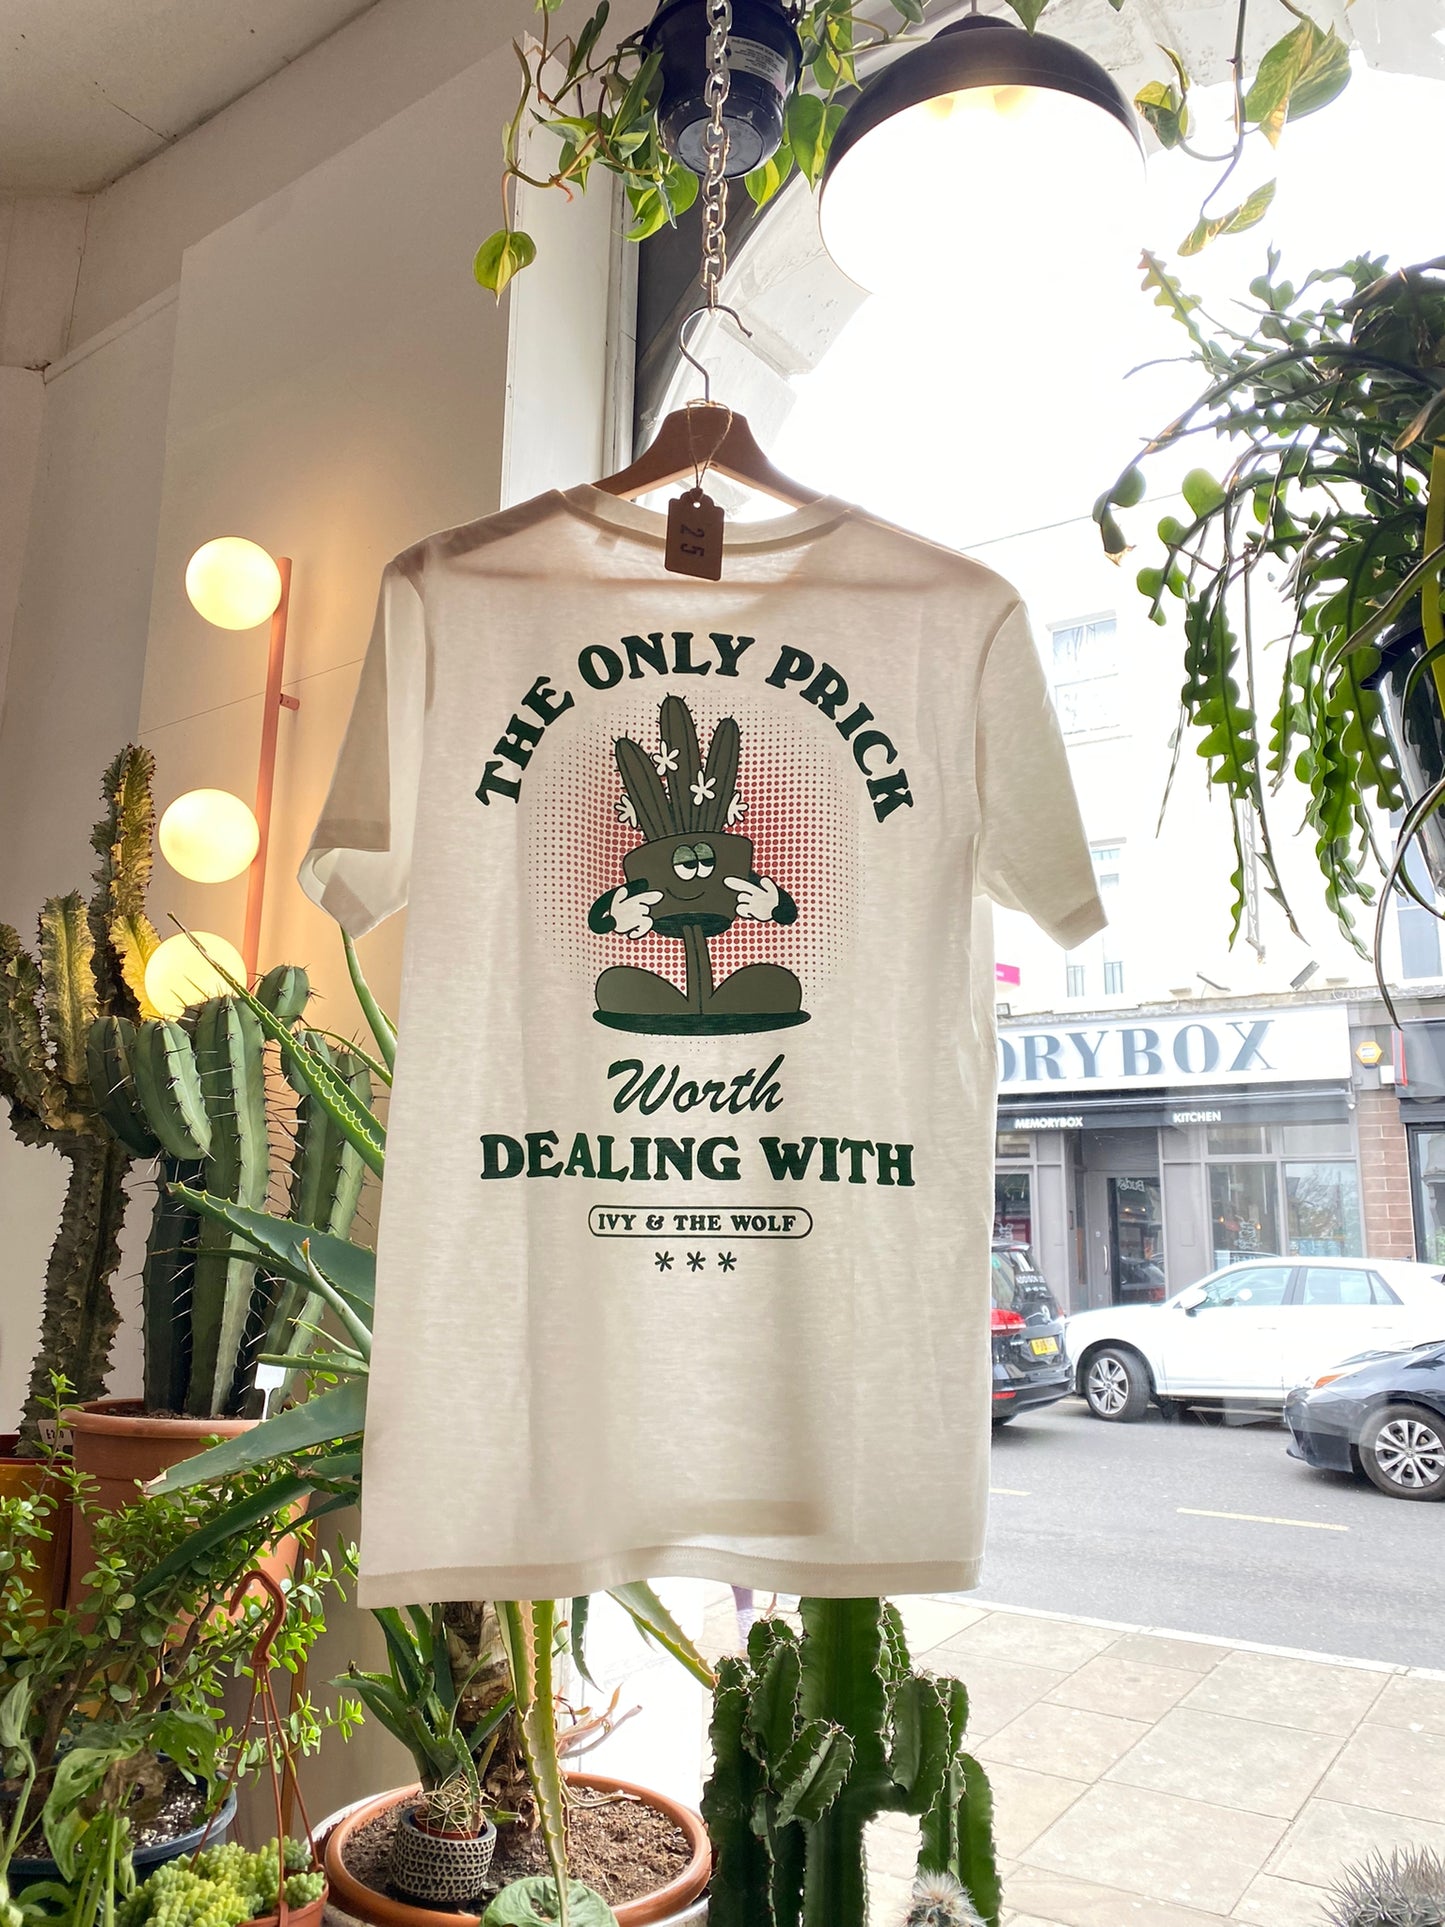 "Only prick worth dealing with" T-Shirt